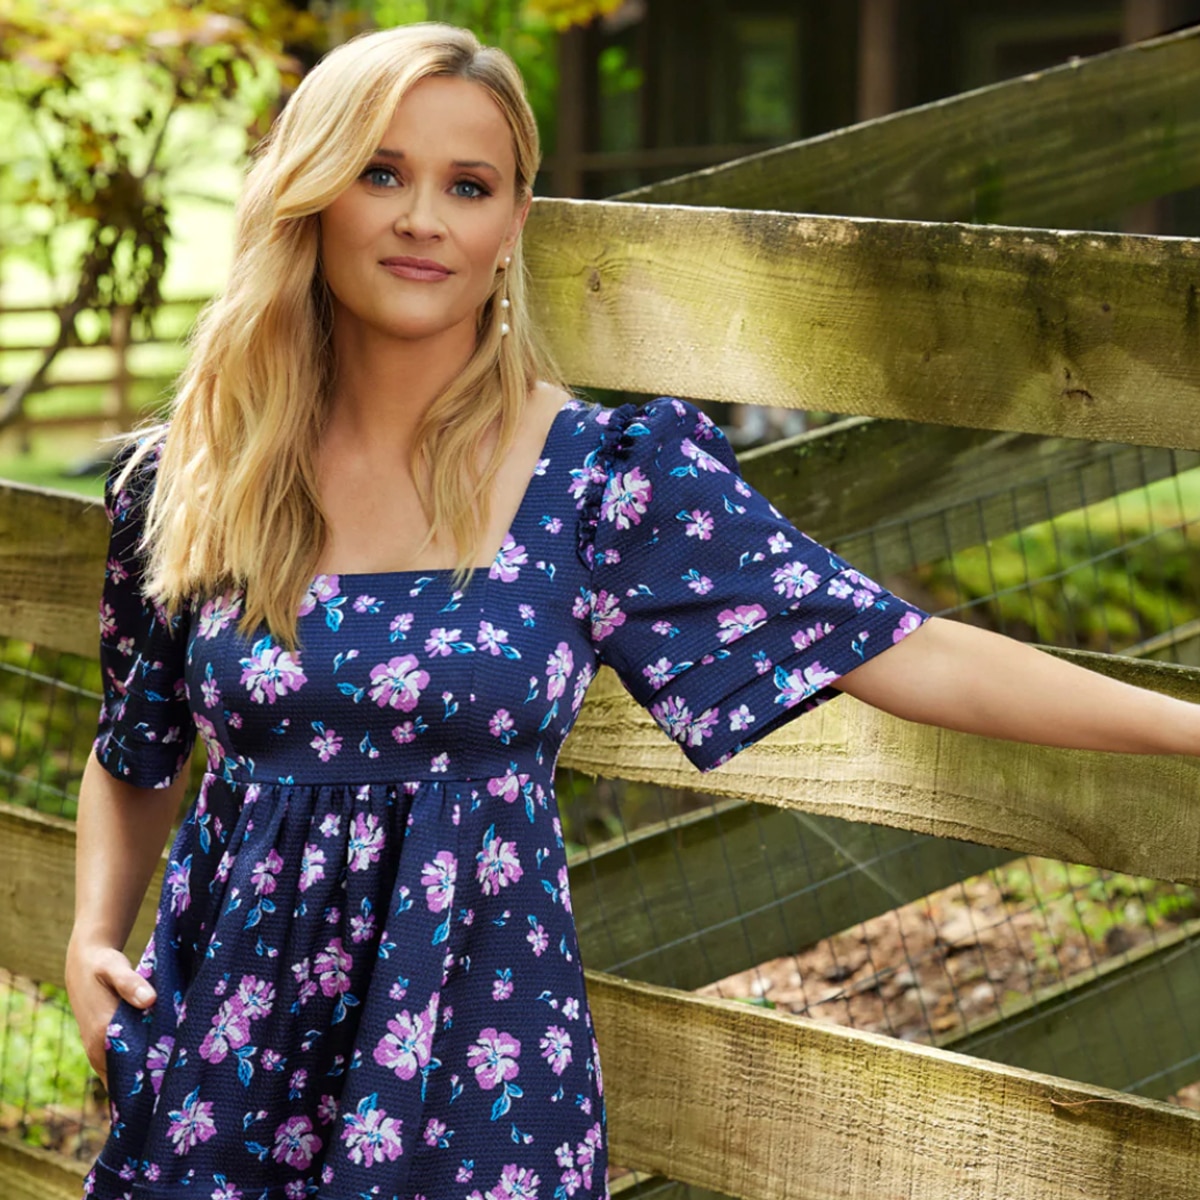 Reese Witherspoon's Draper James Sale: Don't Miss These 70% Off Deals